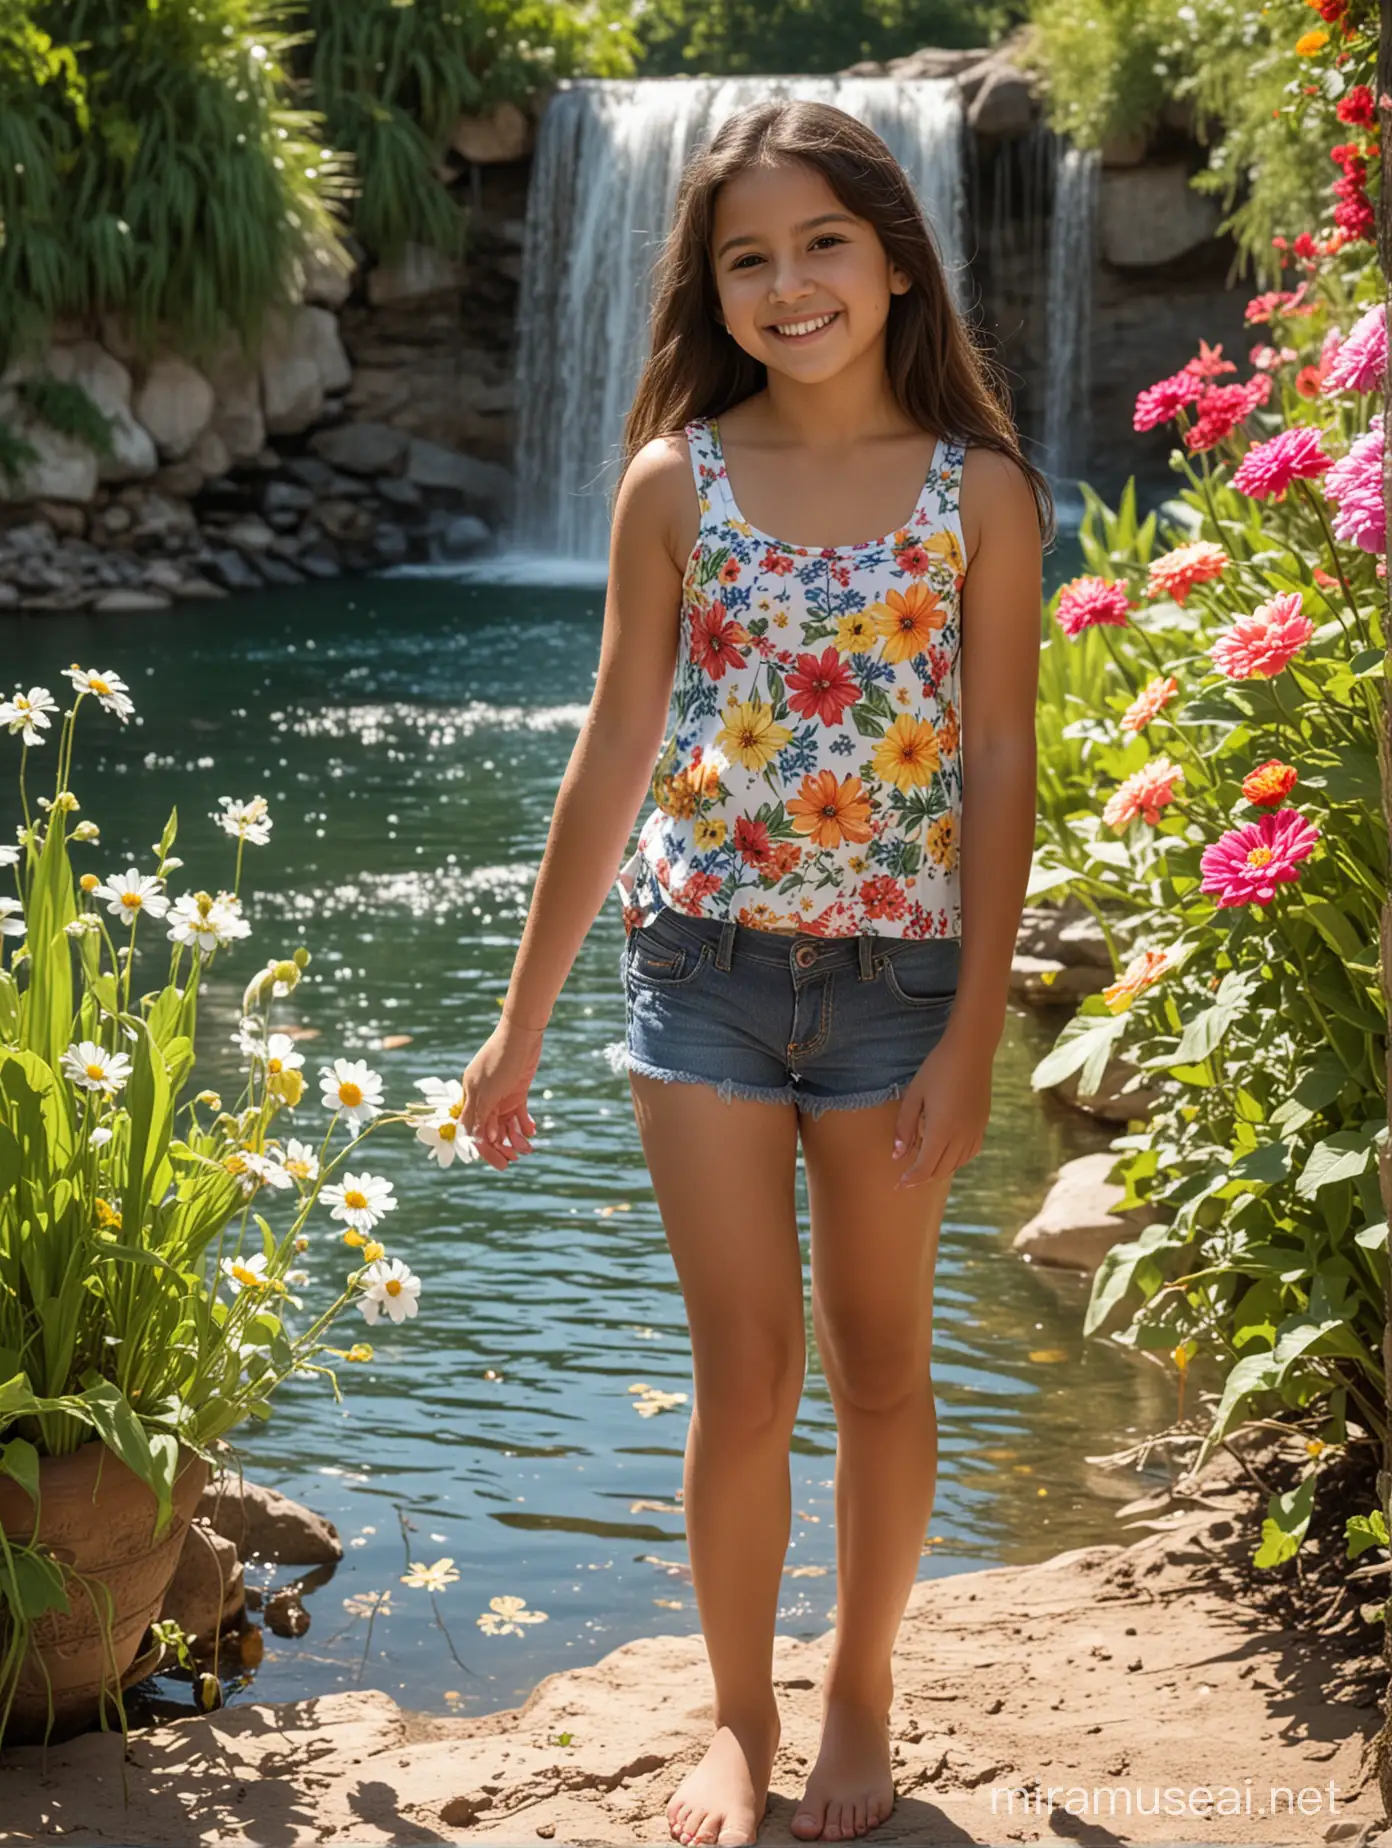 12 year old cute sweet adorable Mexican decent long straight wavy dark hair extremely cute short tank top tight shorts flower garden with a waterfall and a lake barefoot playful happy sunny beautiful day full body full view showing tummy braces 